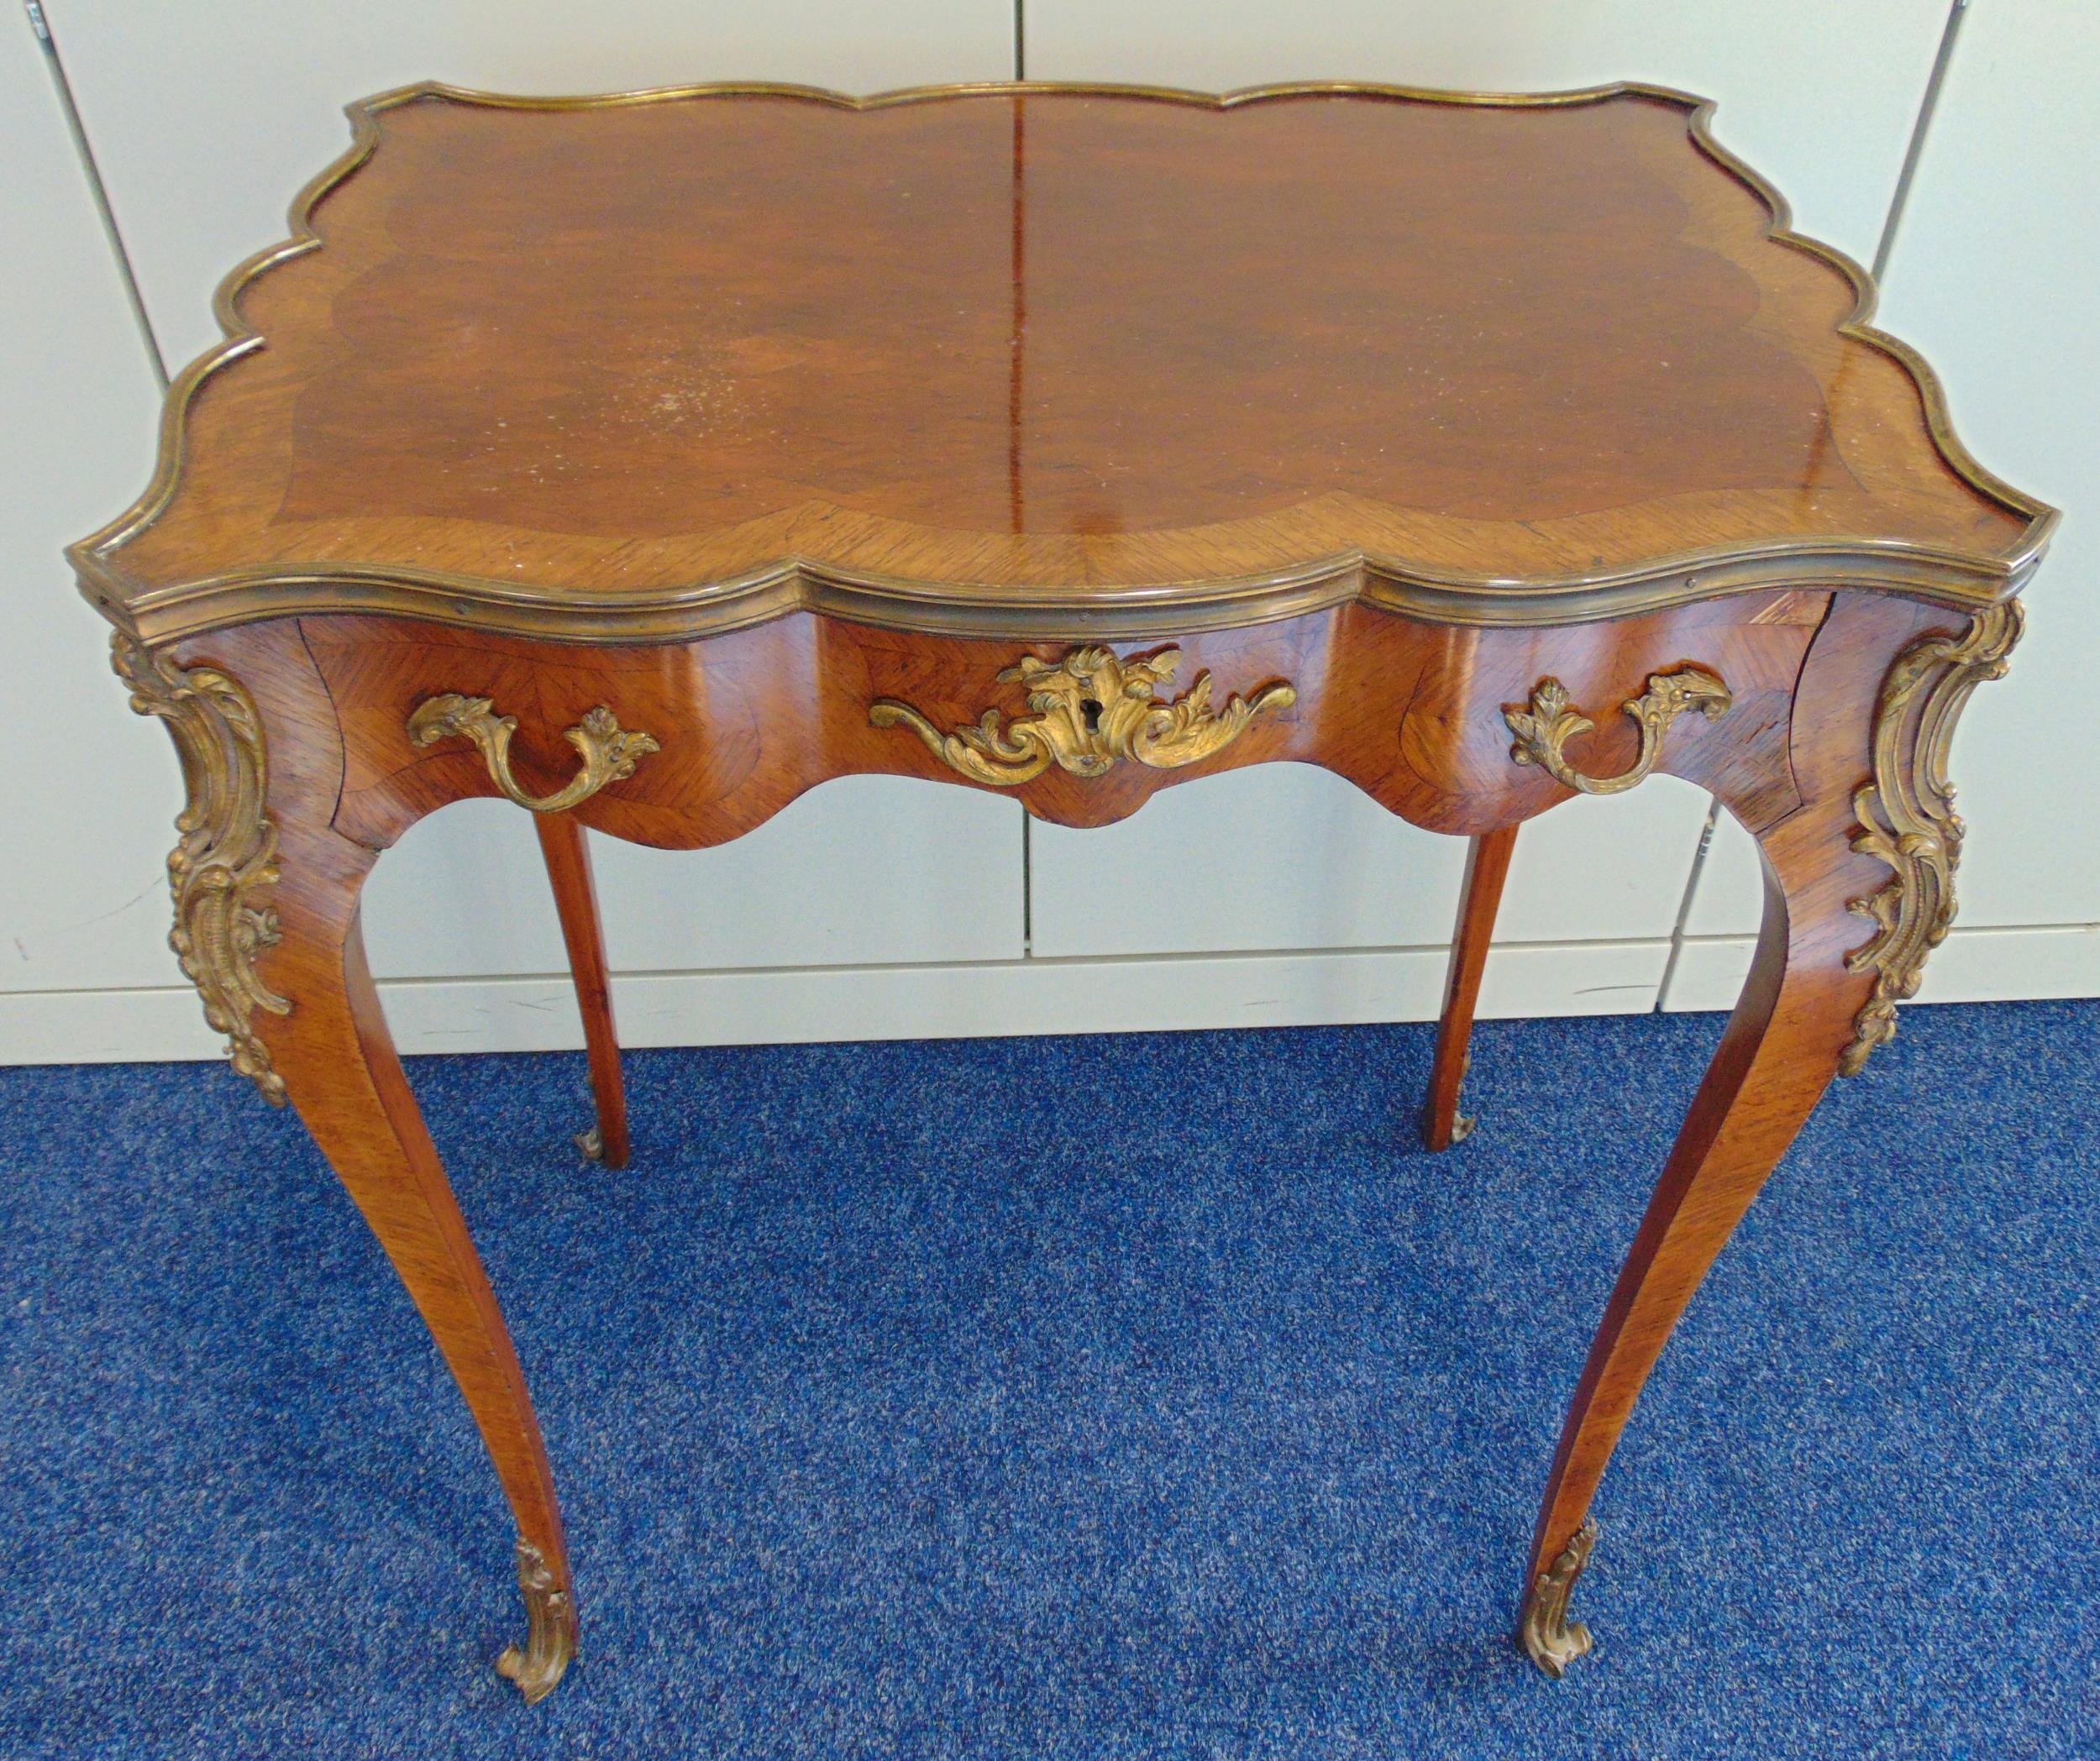 A French style Kingswood rectangular hall table with brass mounts, a single drawer on four